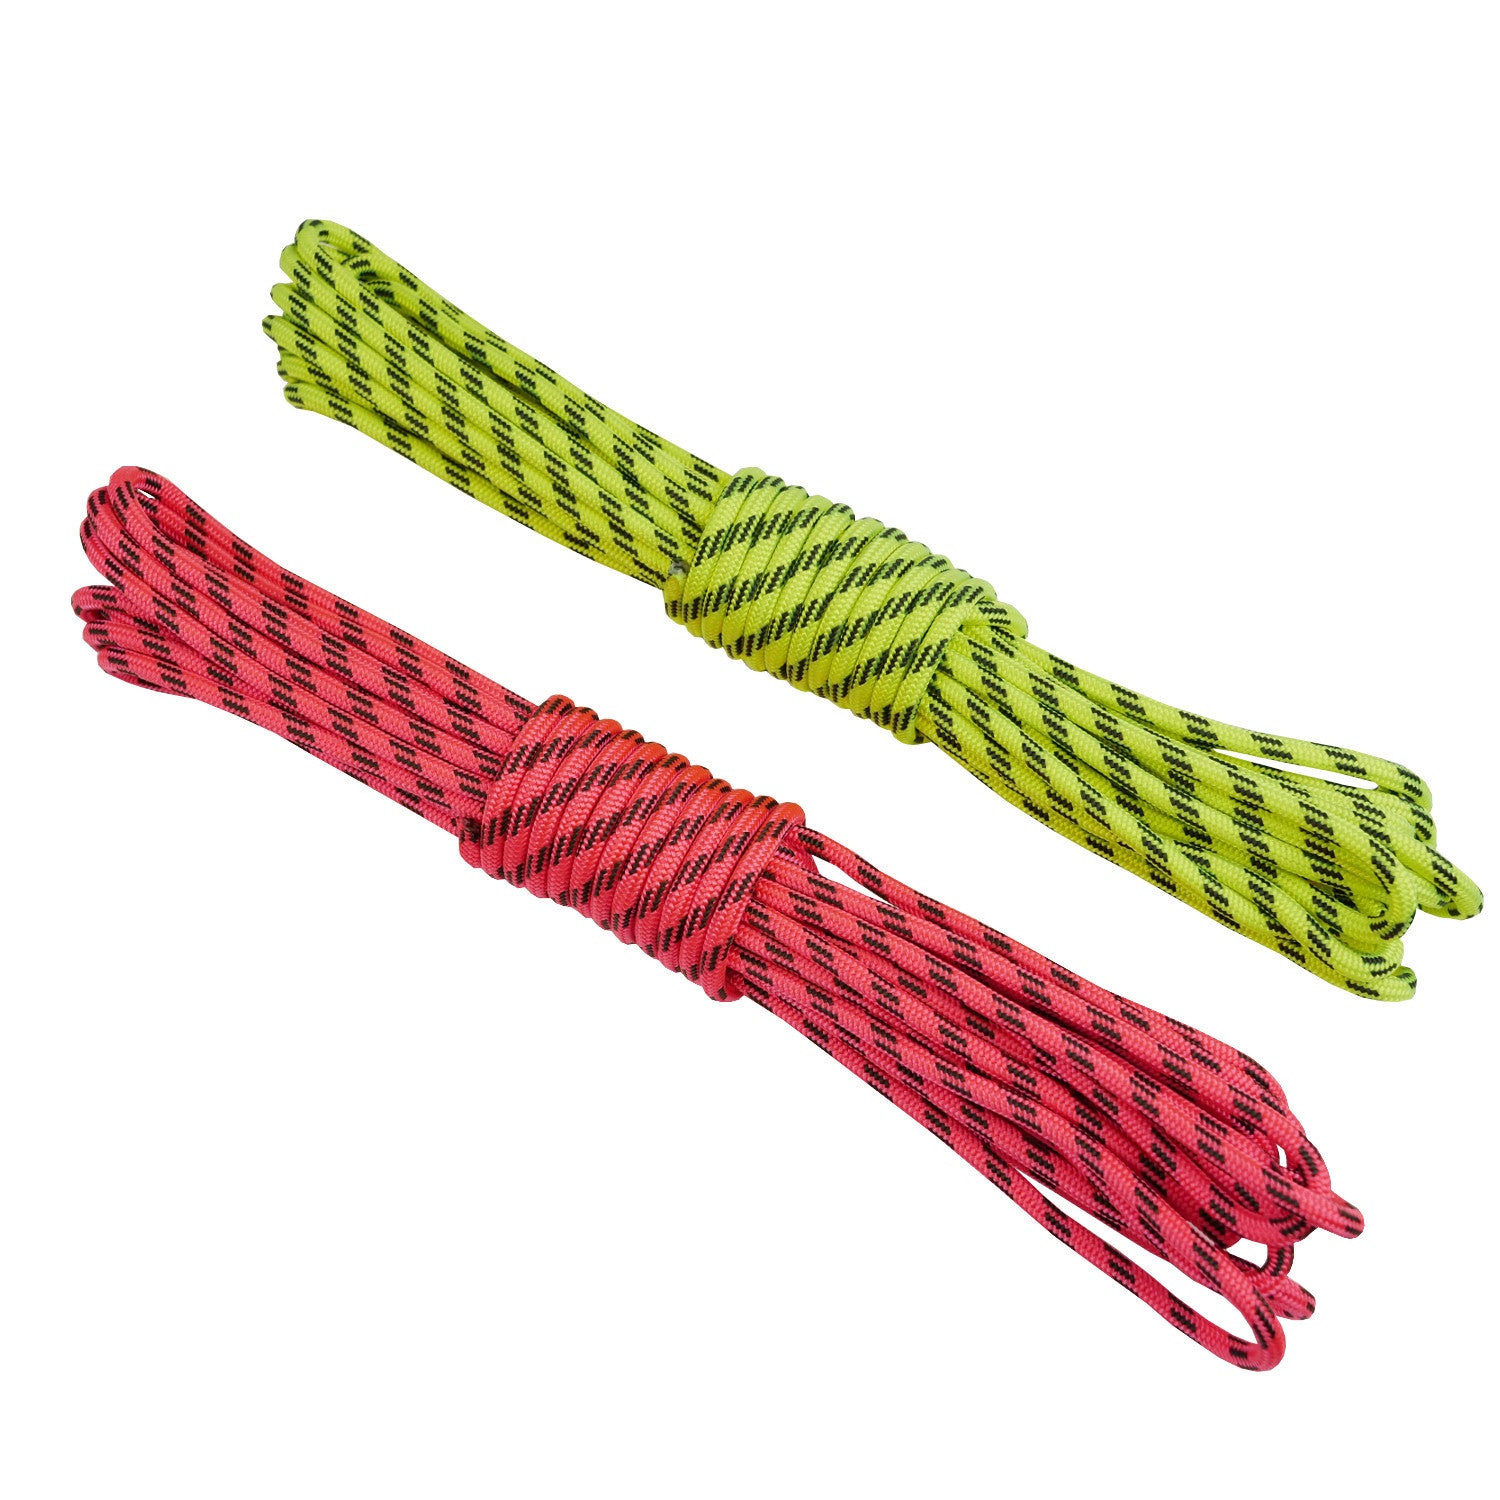 Rock + Run Accessory cord 5mm pink and yellow